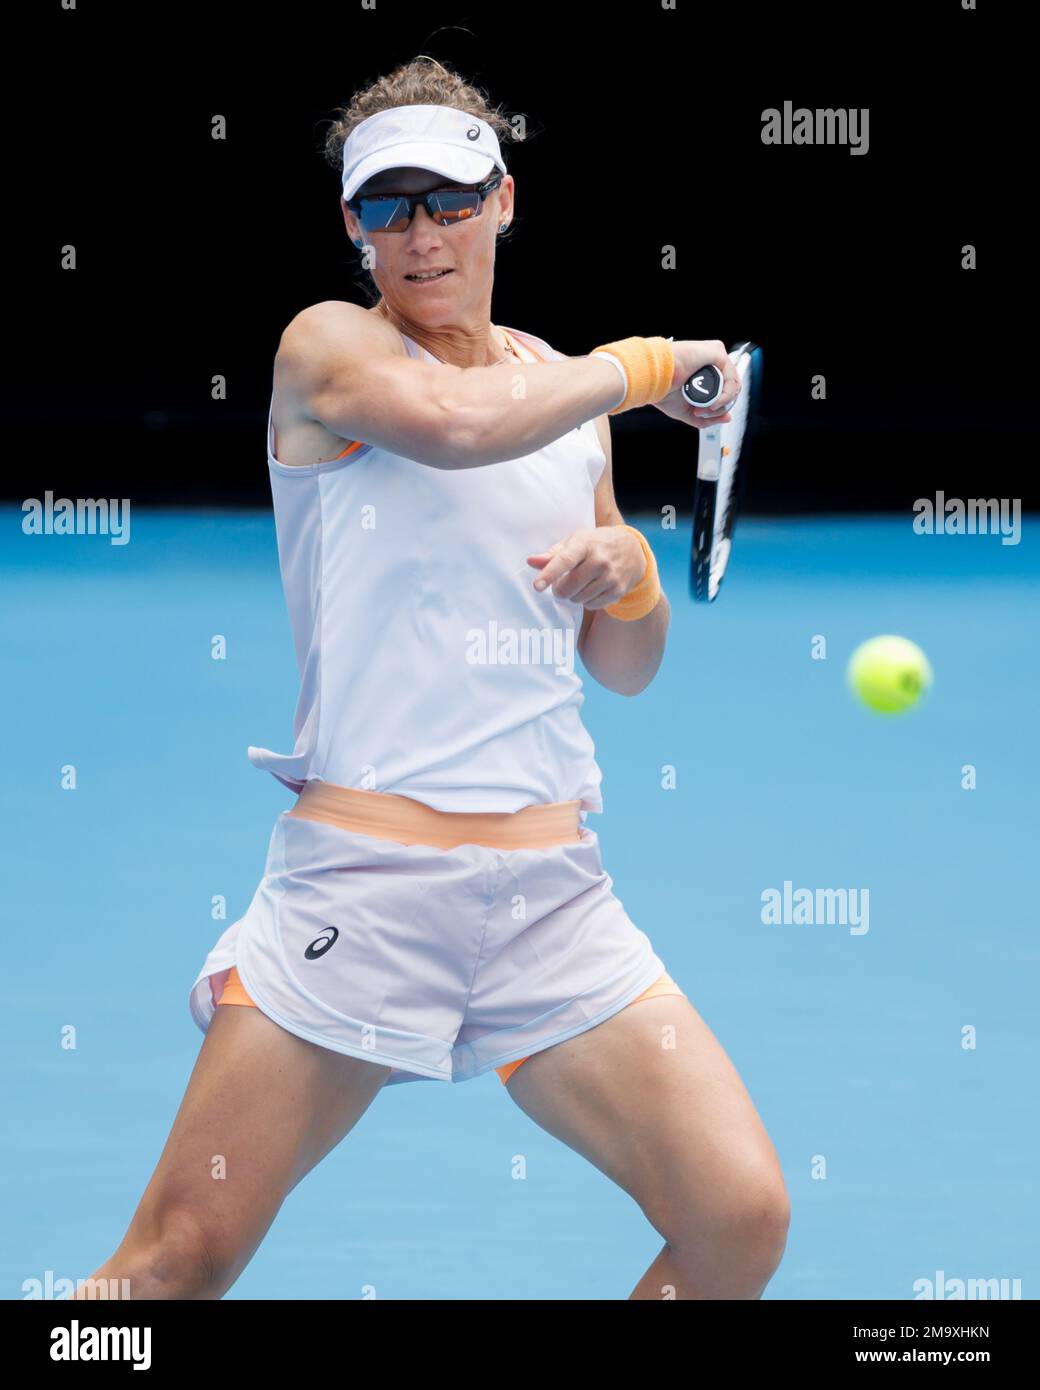 Melbourne, Australia. 19th Jan, 2023. Samantha STOSUR of Australia and Aiize CORNET of France in action against 11th seed Zhaoxuan YANG of China and Hao-Ching CHAN of Taipei in the 1st round Women's Doubles match on day 4 of the 2023 Australian Open on Kia Arena, in Melbourne, Australia. Sydney Low/Cal Sport Media. Credit: csm/Alamy Live News Stock Photo